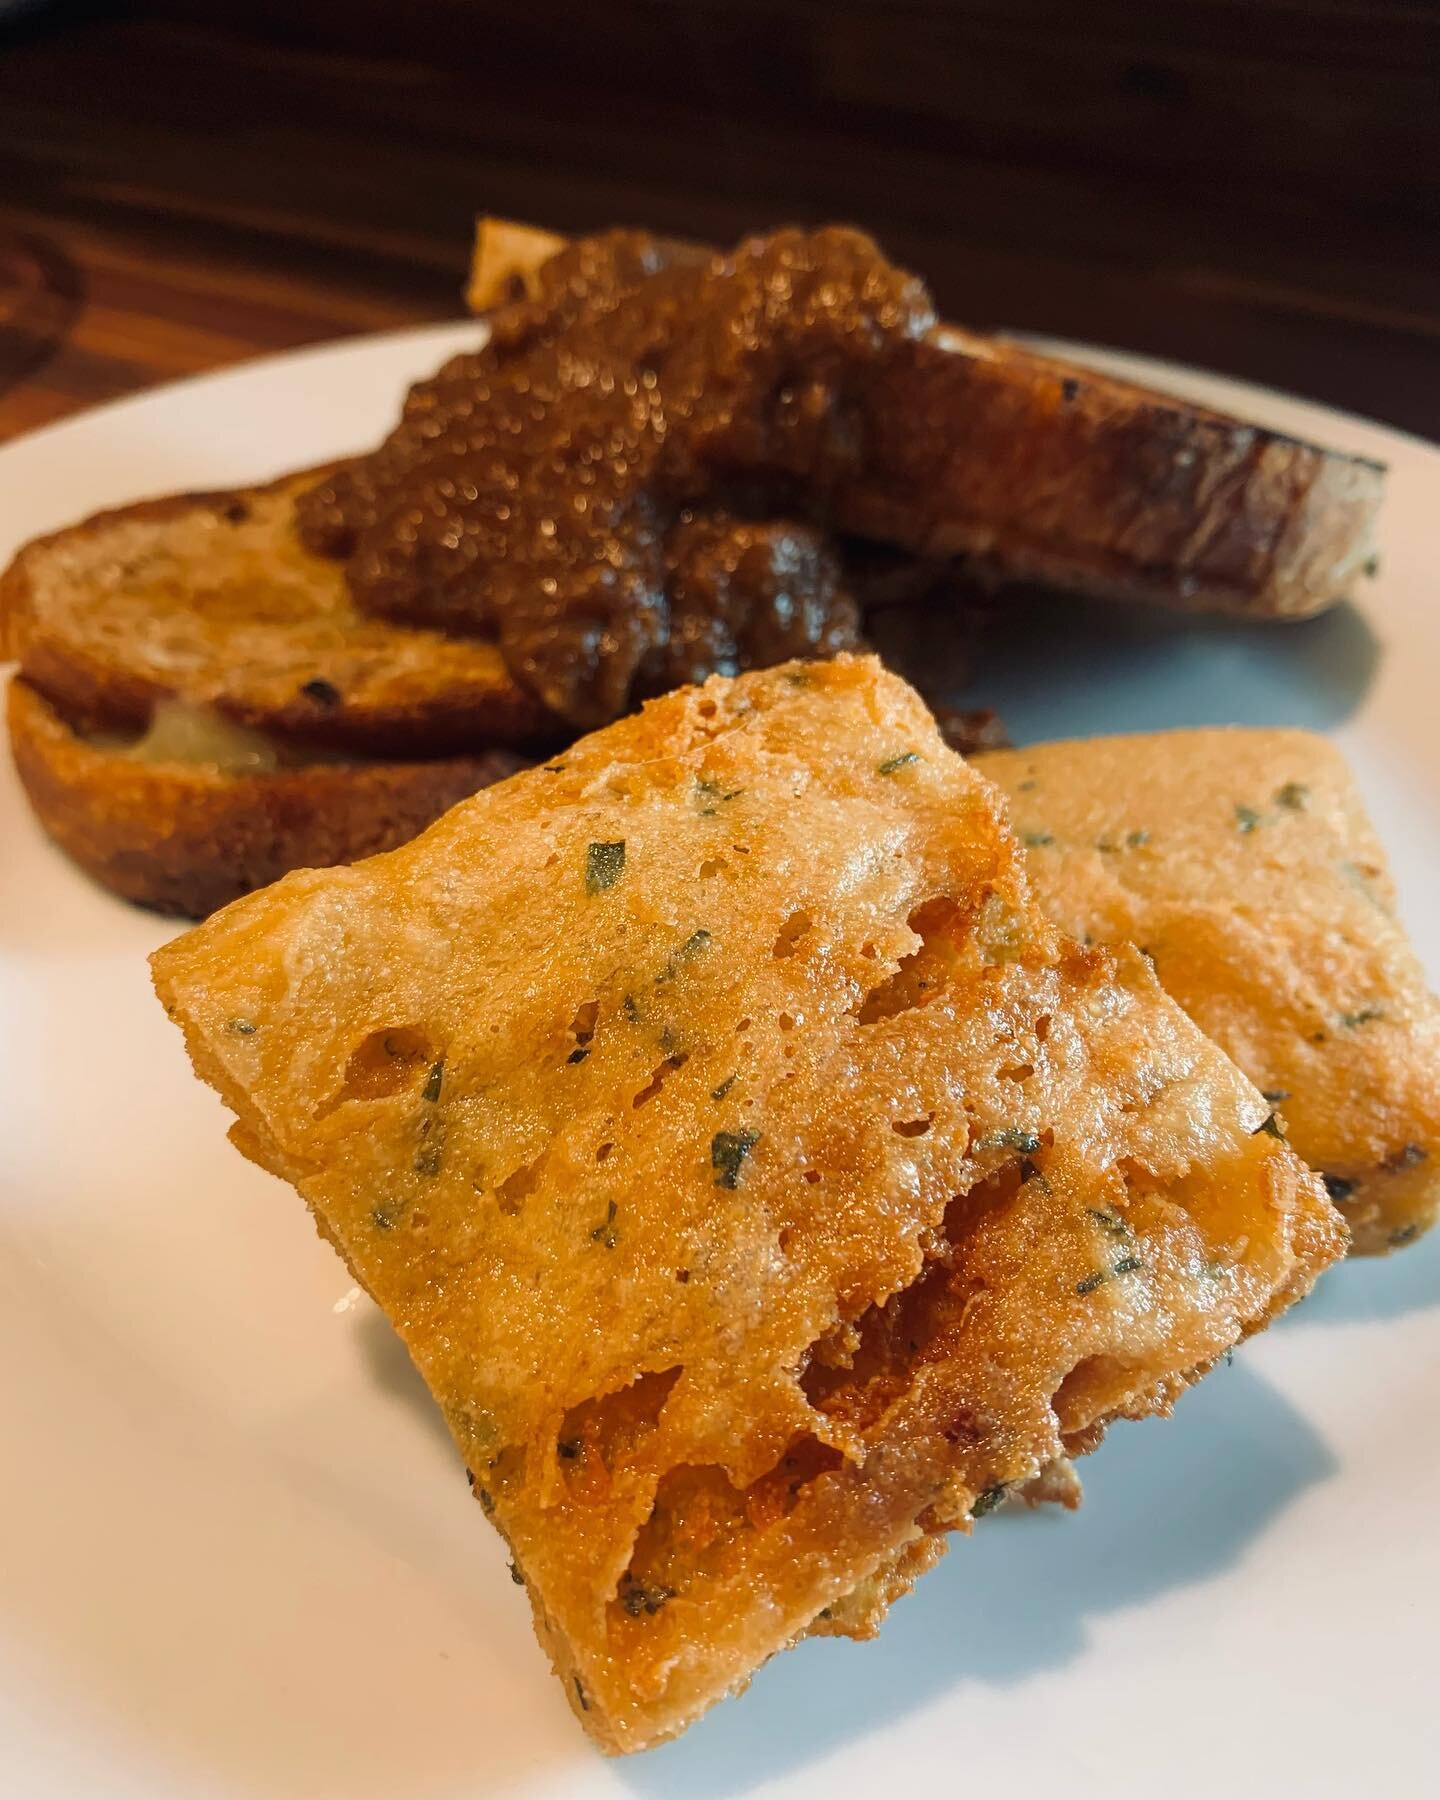 Super excited about these future specials to our menu &hellip; Panelle, a Sicilian chickpea fritter, and Short Rib Birria Grilled Cheese. Chickpea flour grown in MT from 41 Grains, Foothill Farm beef, Lifeline Dairy Montzarella, Grist Mill Bianco. #n